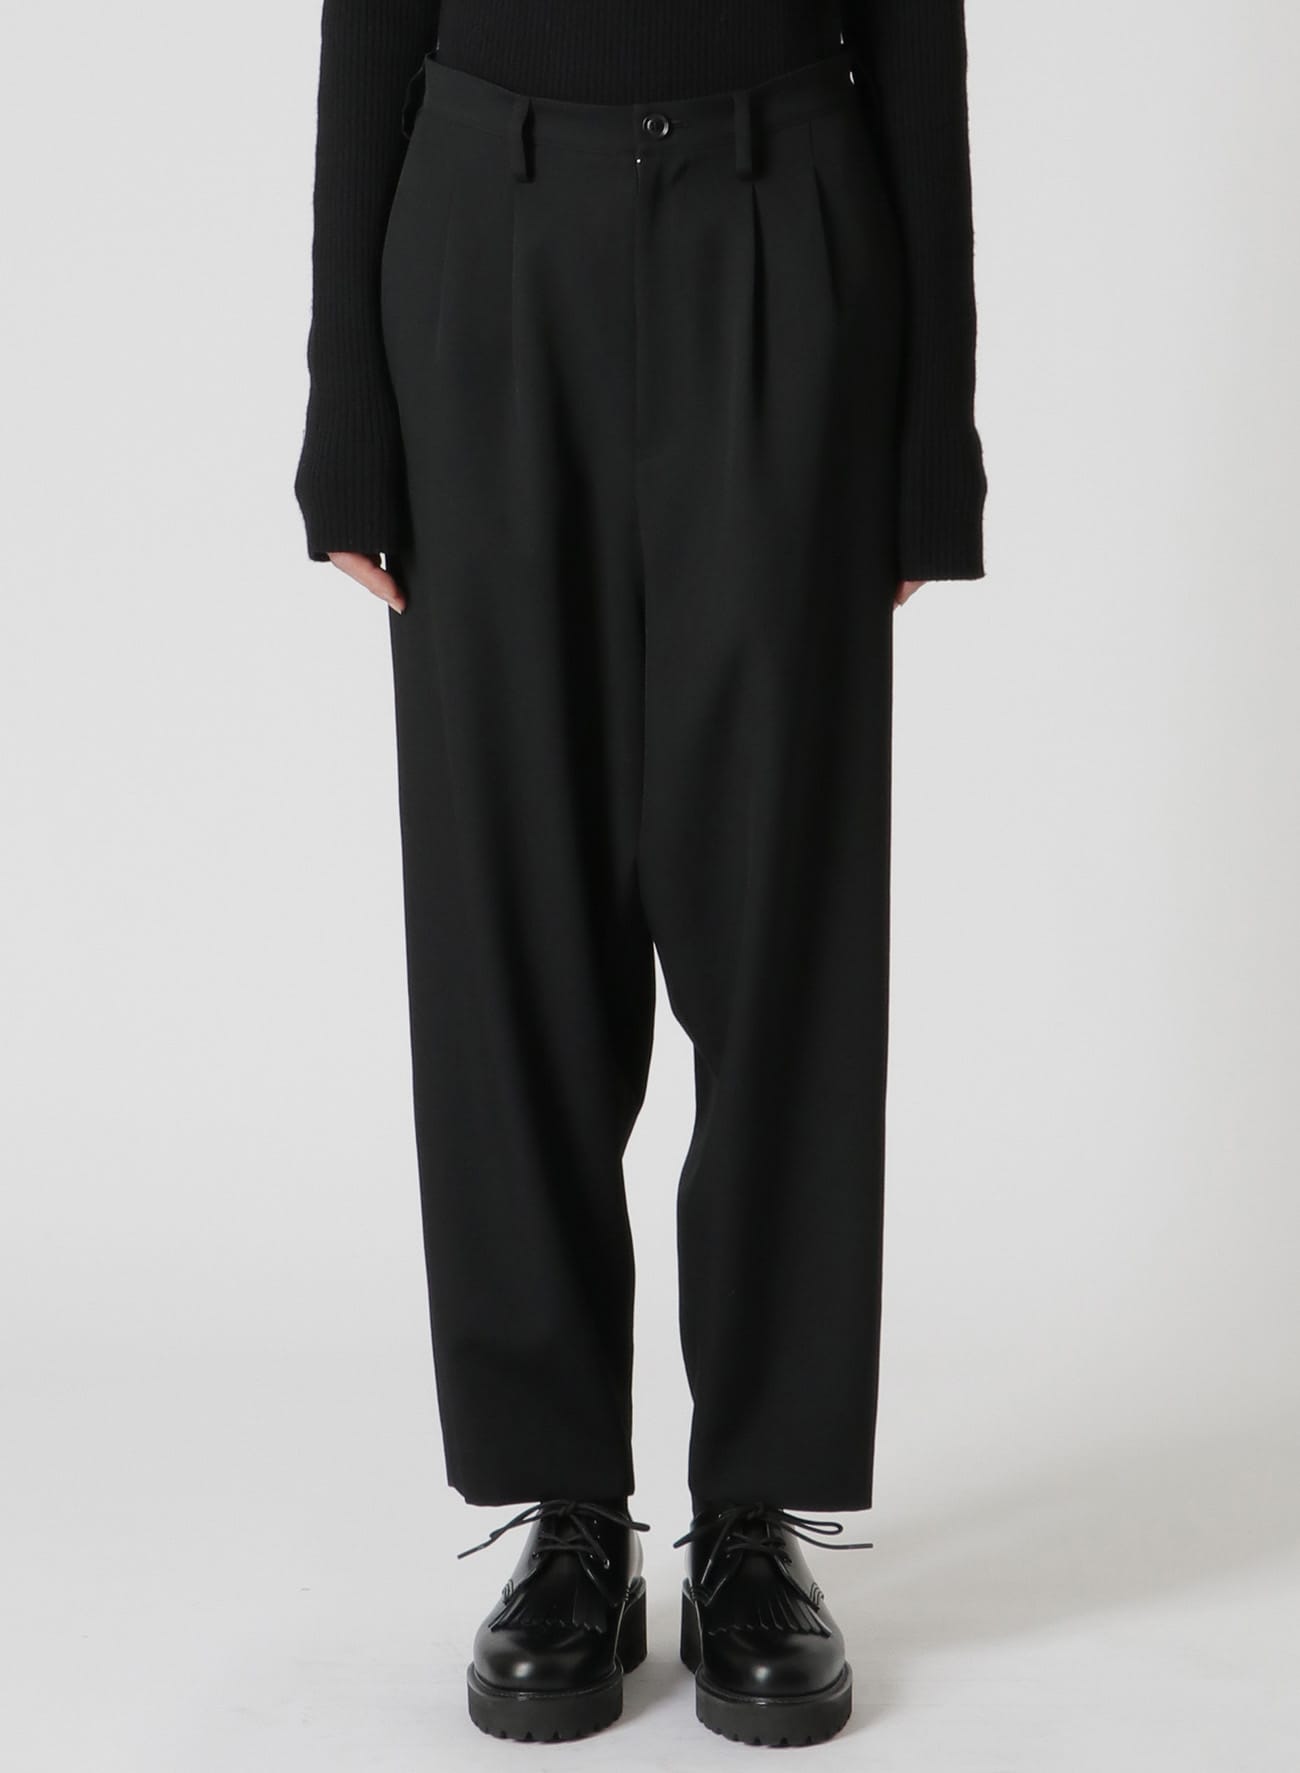 WOOL GABARDINE TAPERED DOUBLE PLEATED PANTS(XS Black): Y's｜THE